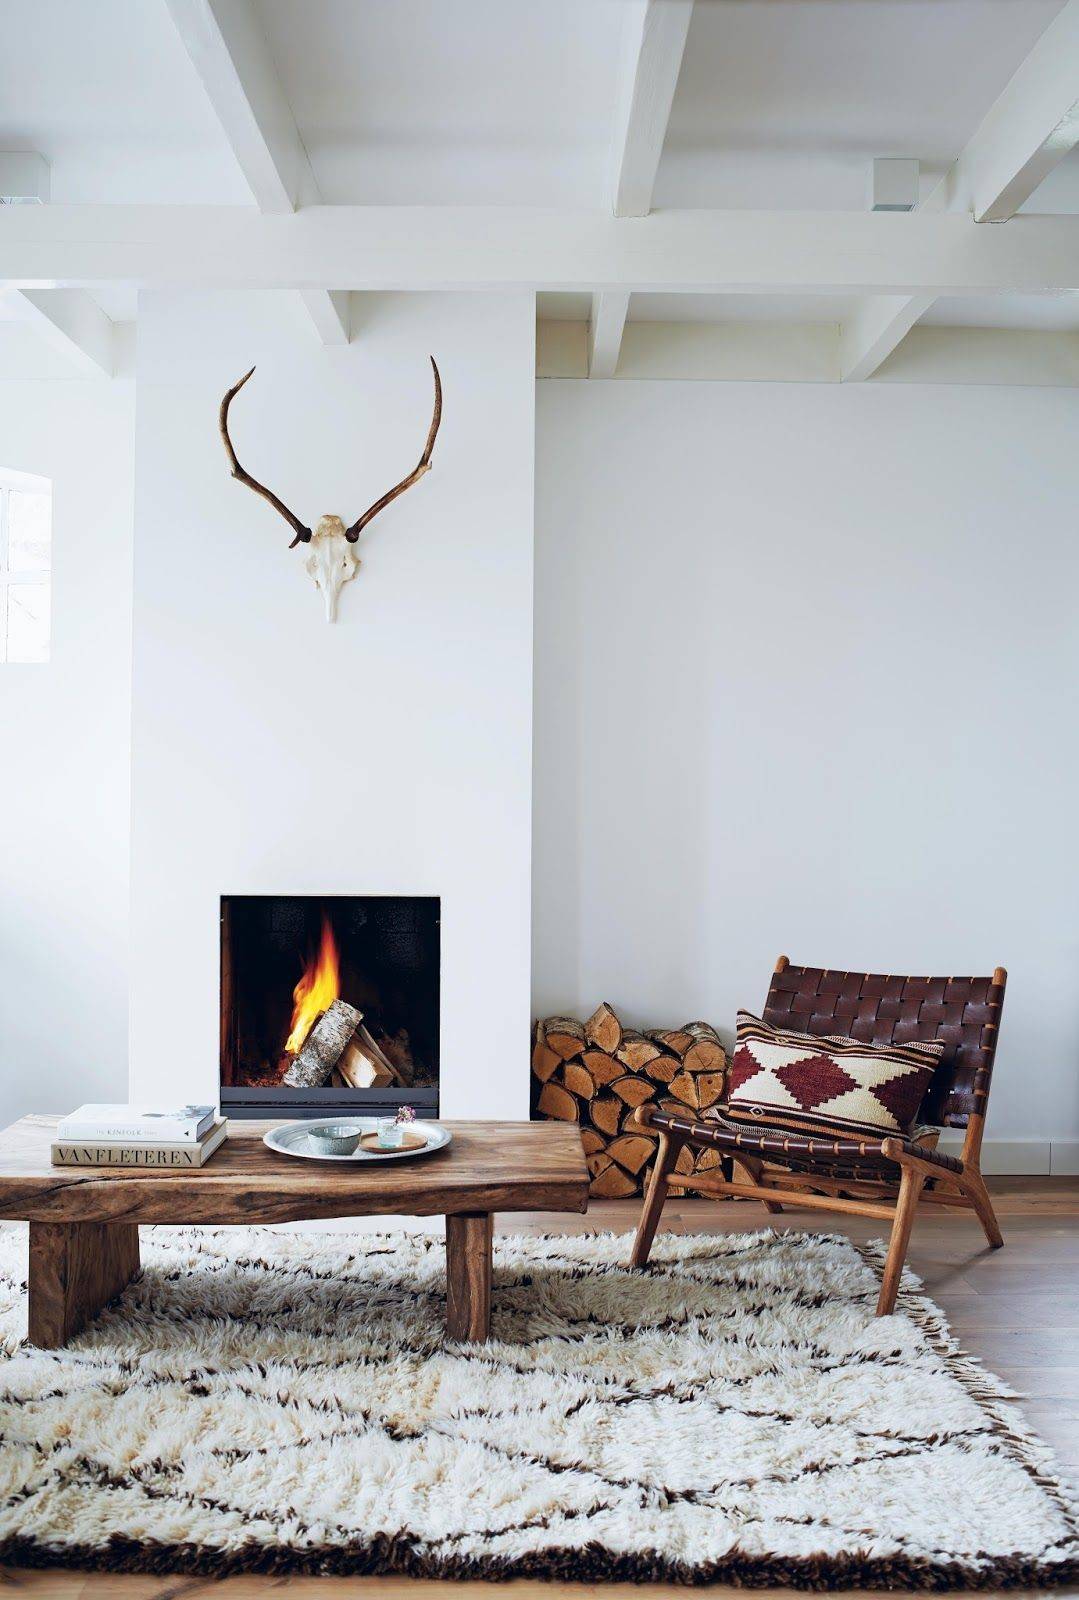 Malm Fireplaces That Complete Any Cozy Room